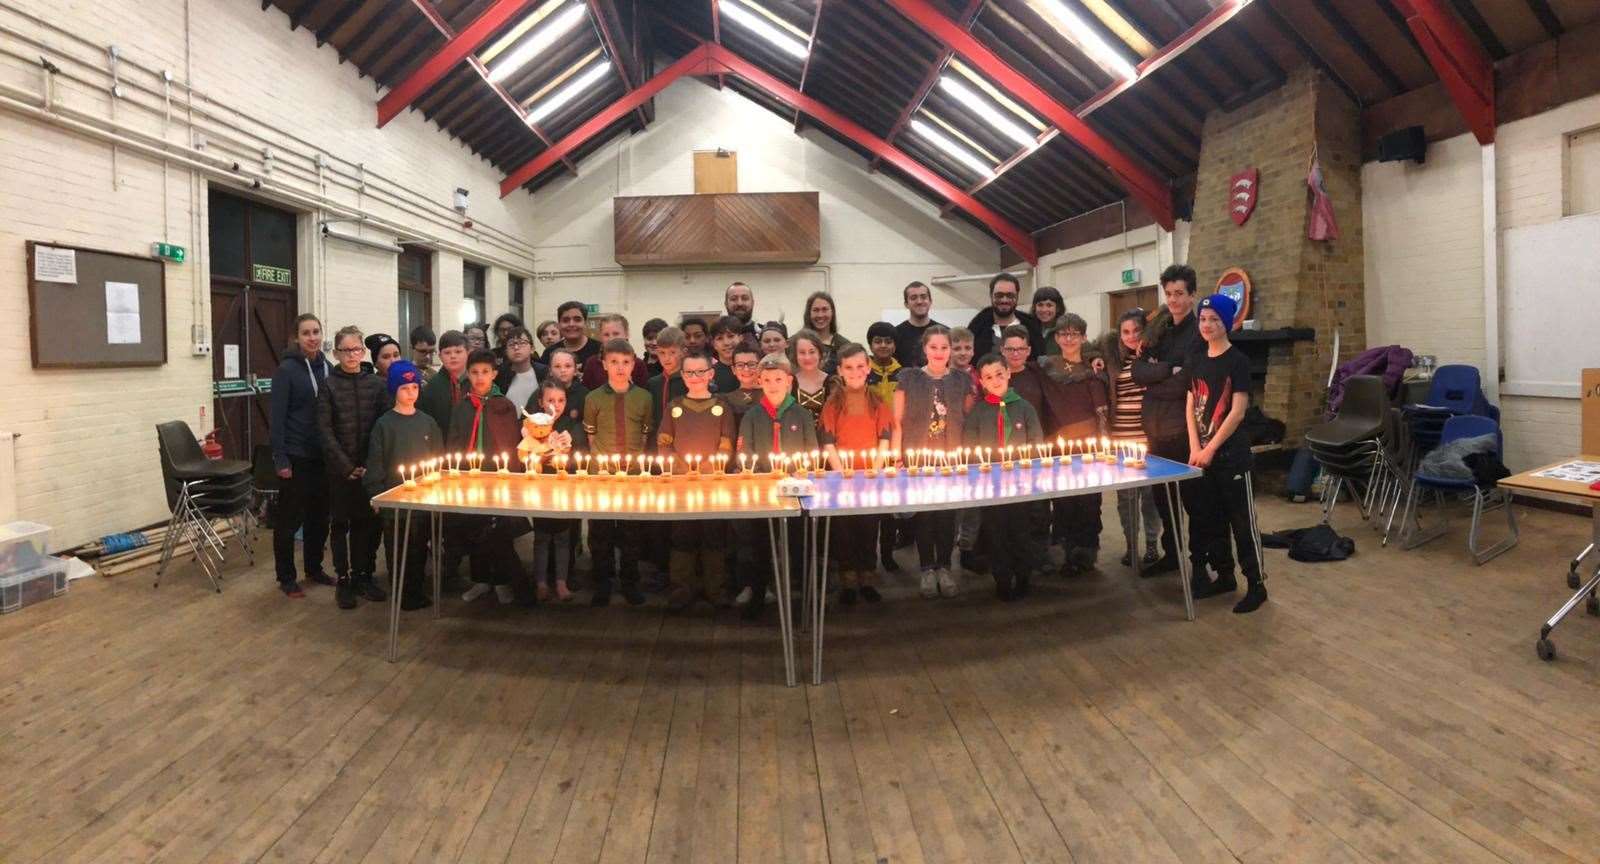 The 1st Northfleet Scout Group celebrates its 110th birthday with cake and candles